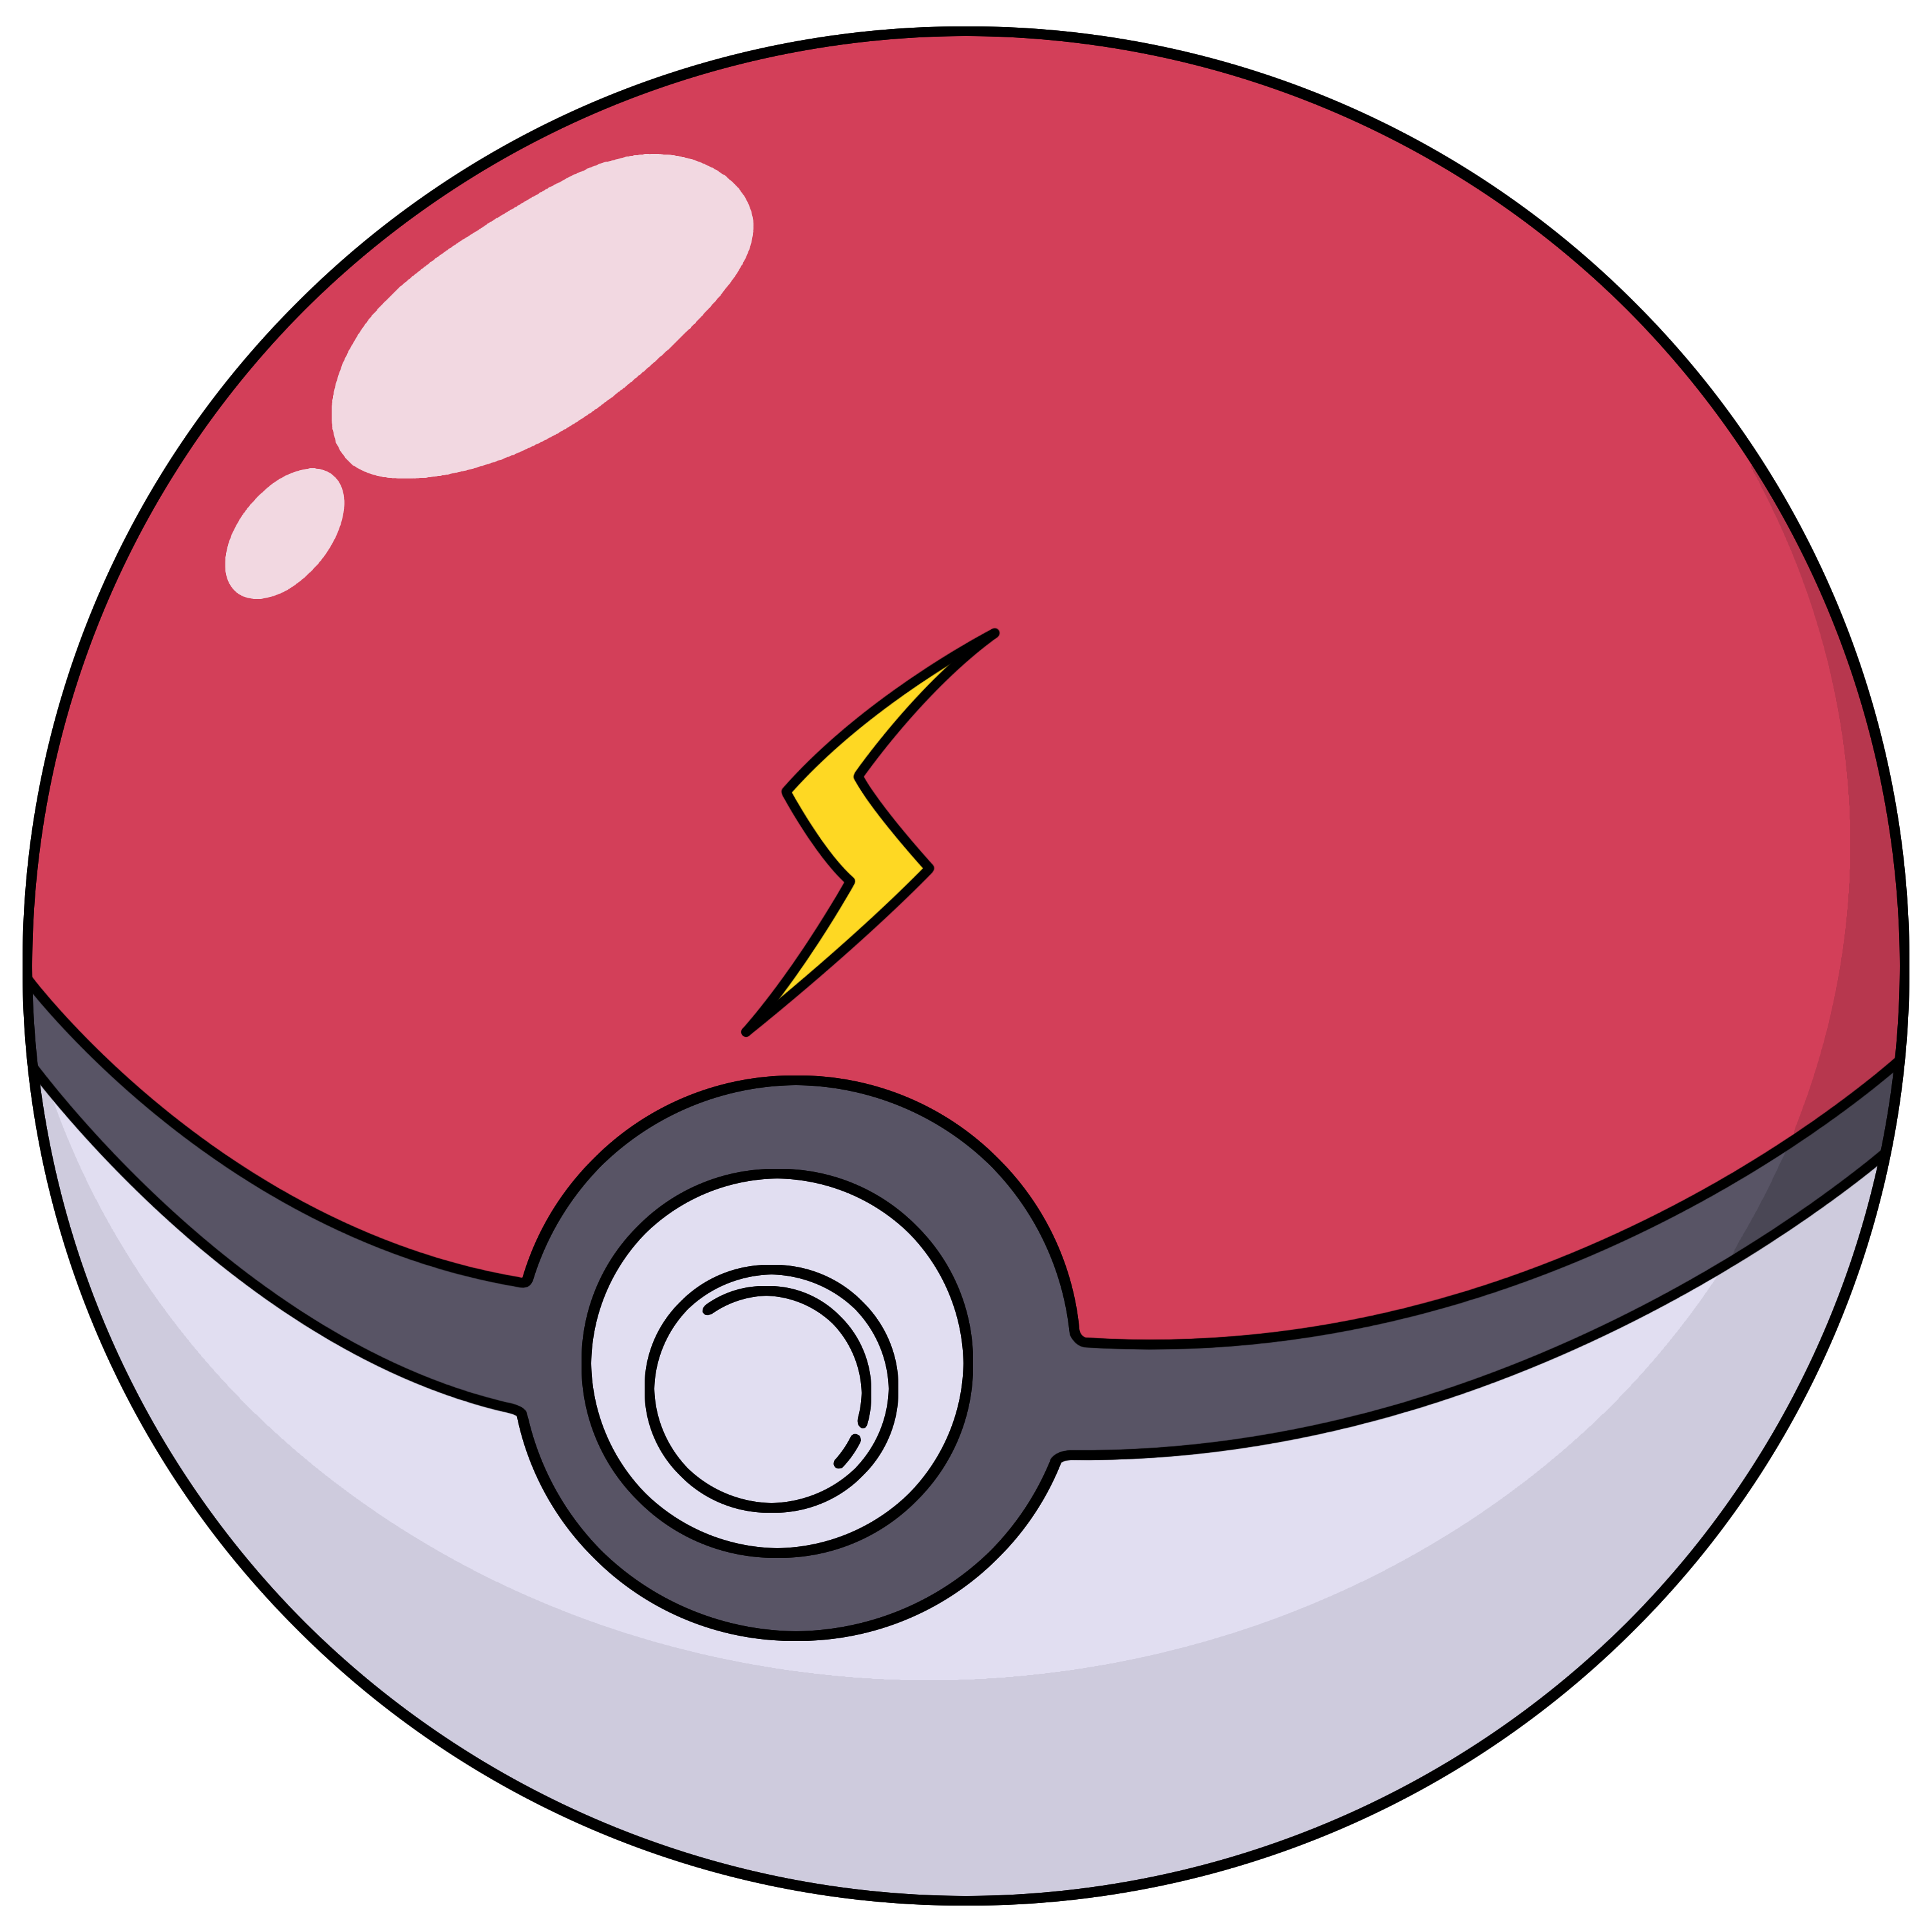 Pikachu clipart ball, Pikachu ball Transparent FREE for download on